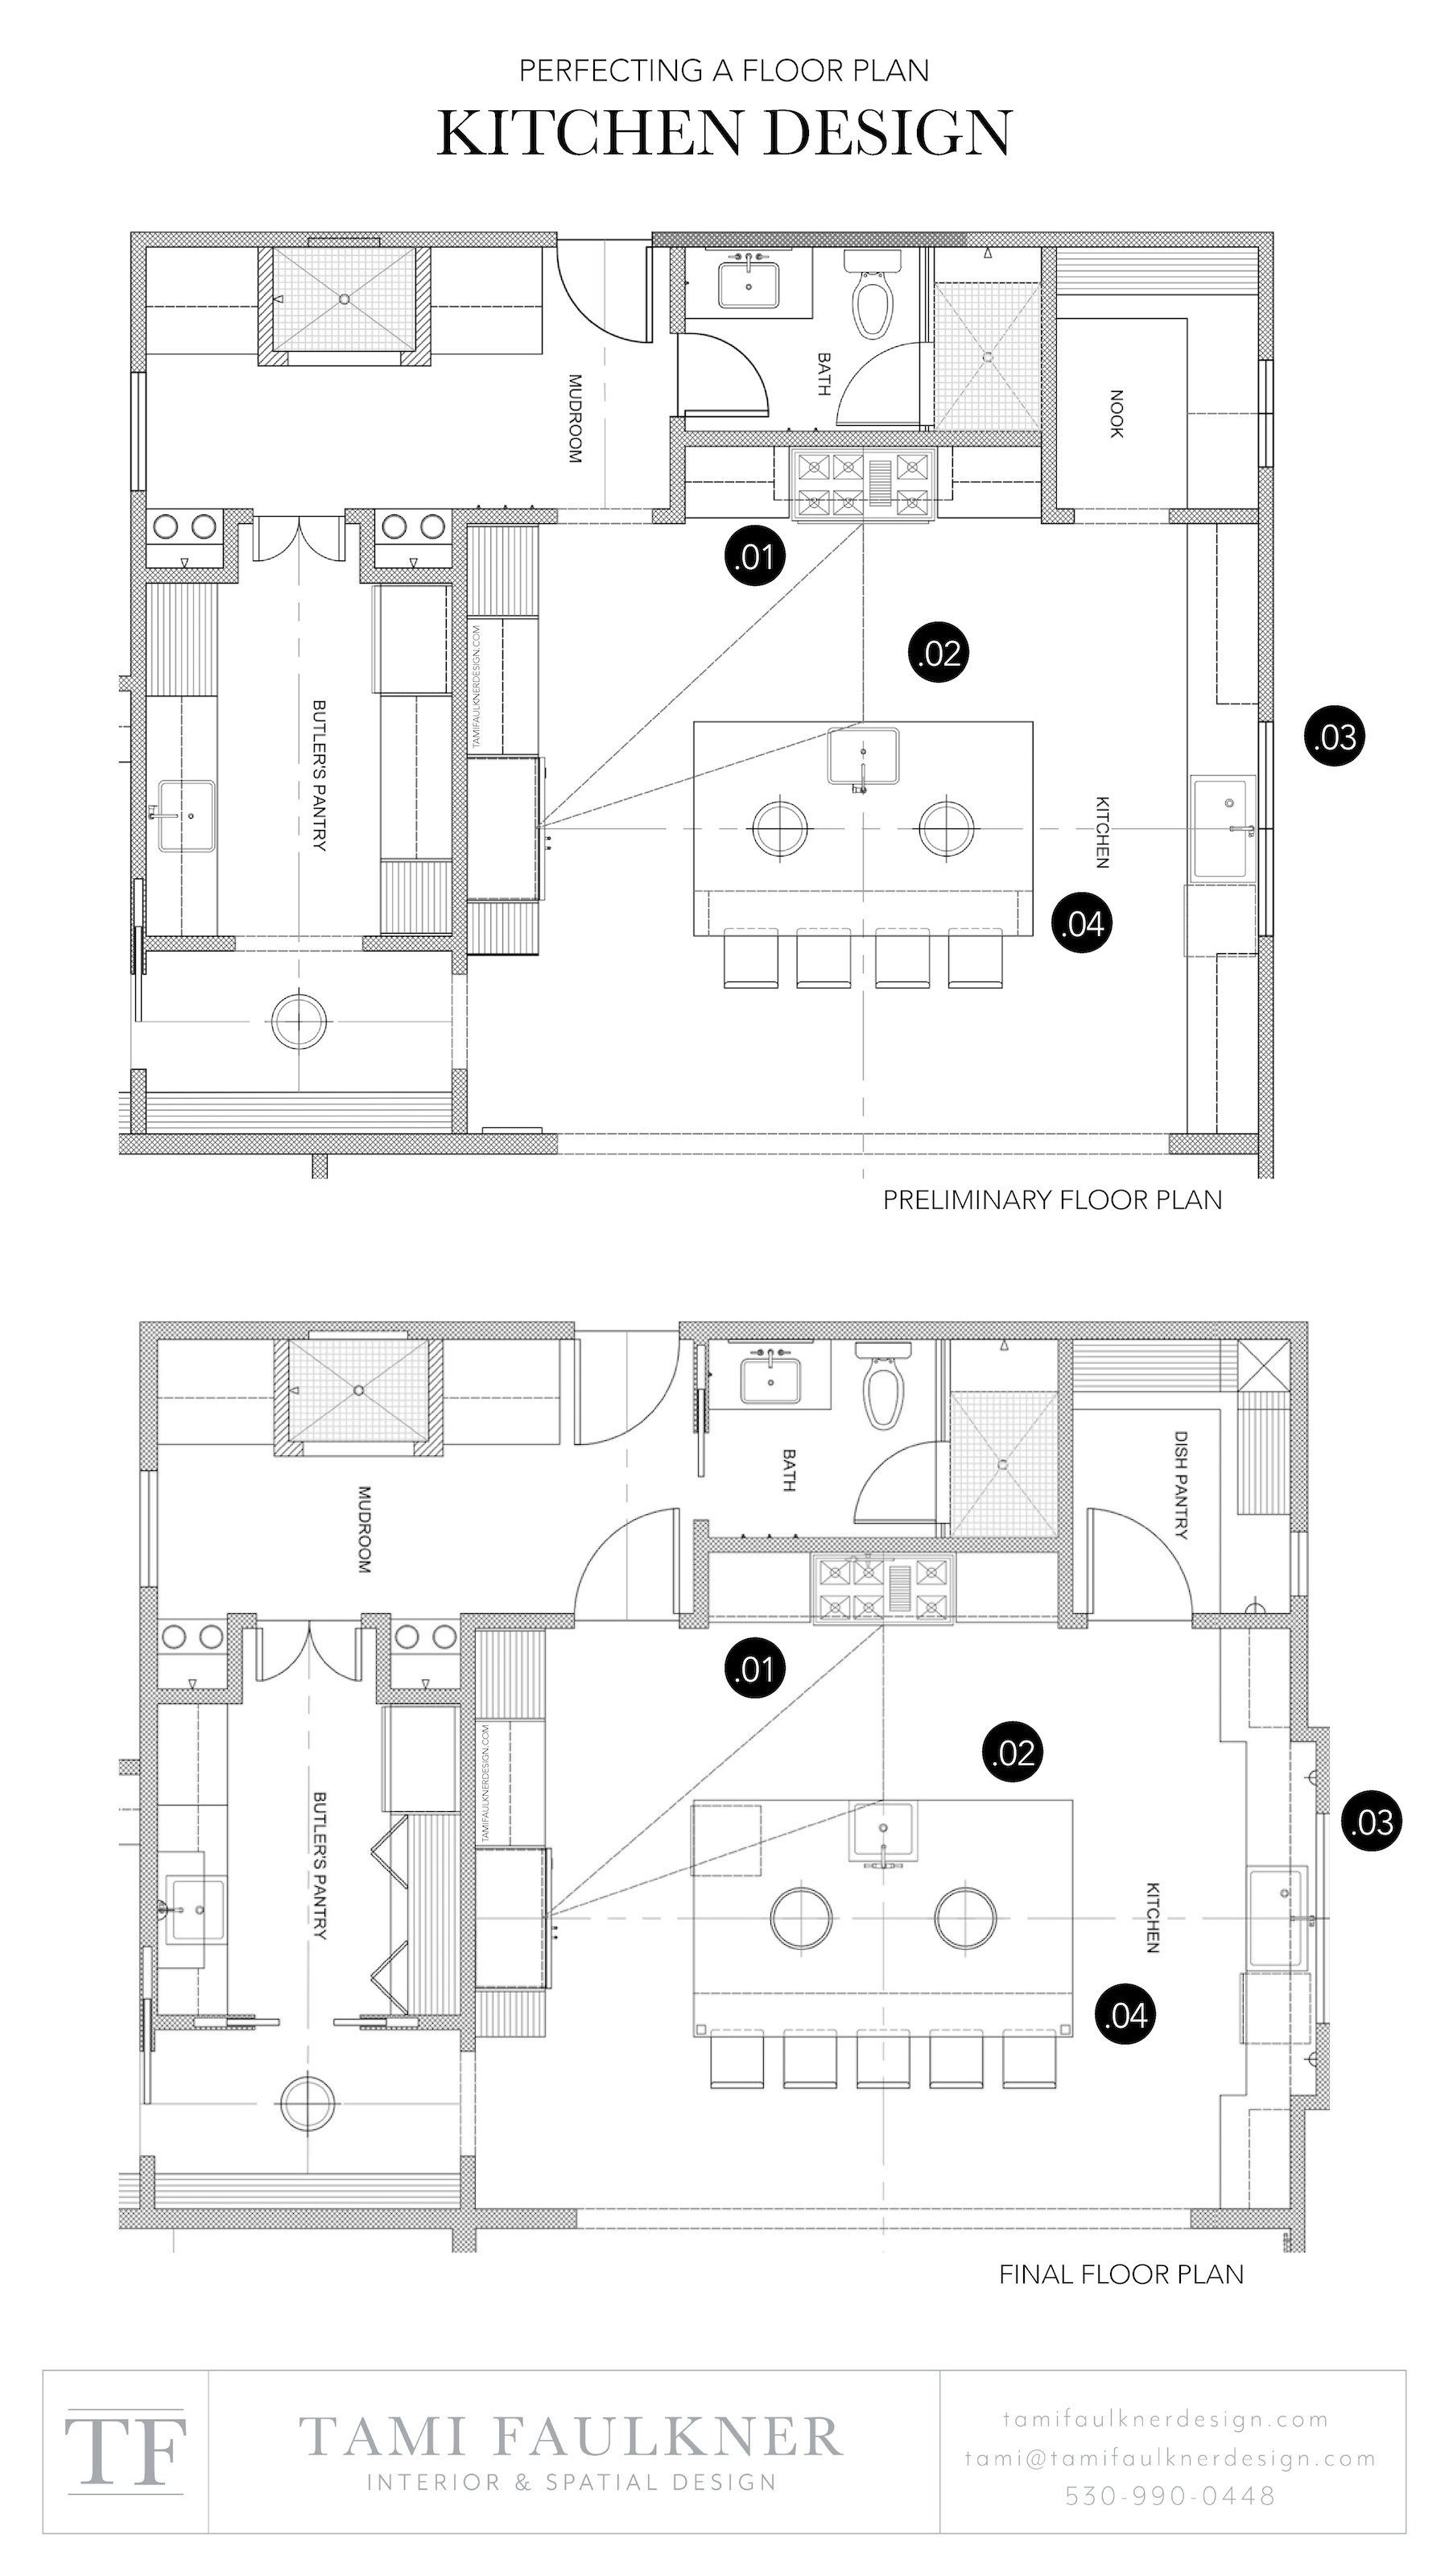 perfecting a kitchen floor plan - orchard abode project — tami